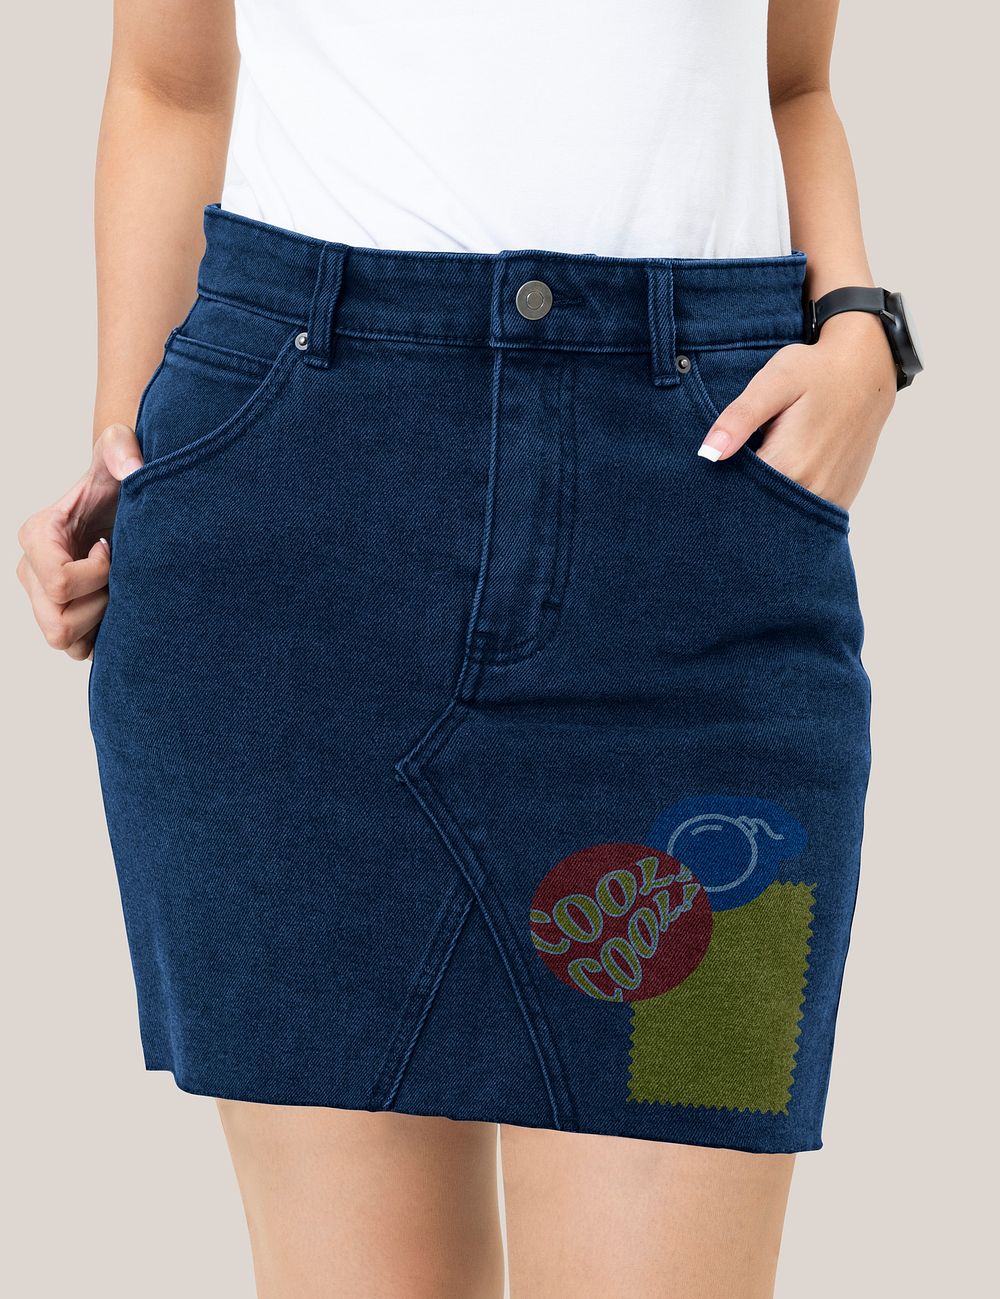 Woman in denim skirt front view stylish fashion photoshoot close up